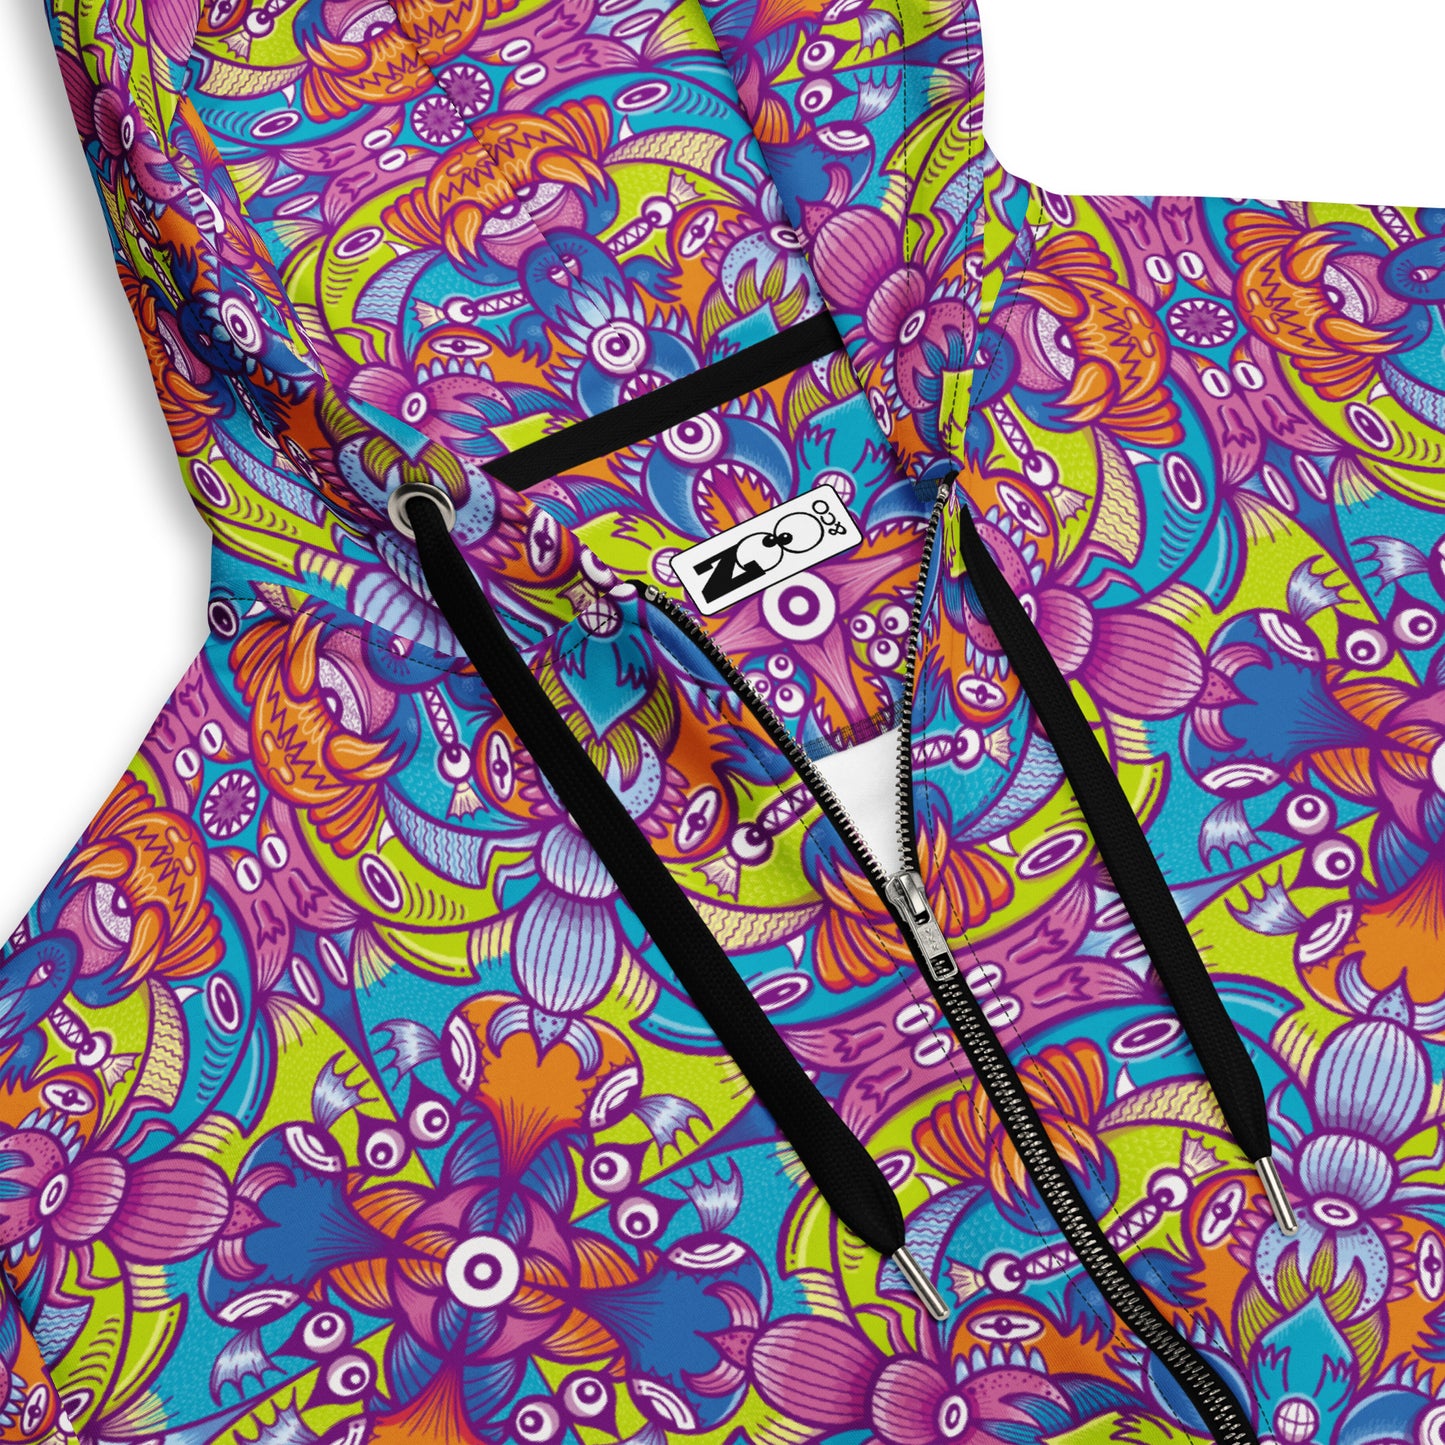 Whimsical Critter Chaos: A Doodle Adventure - Unisex zip hoodie. Product details